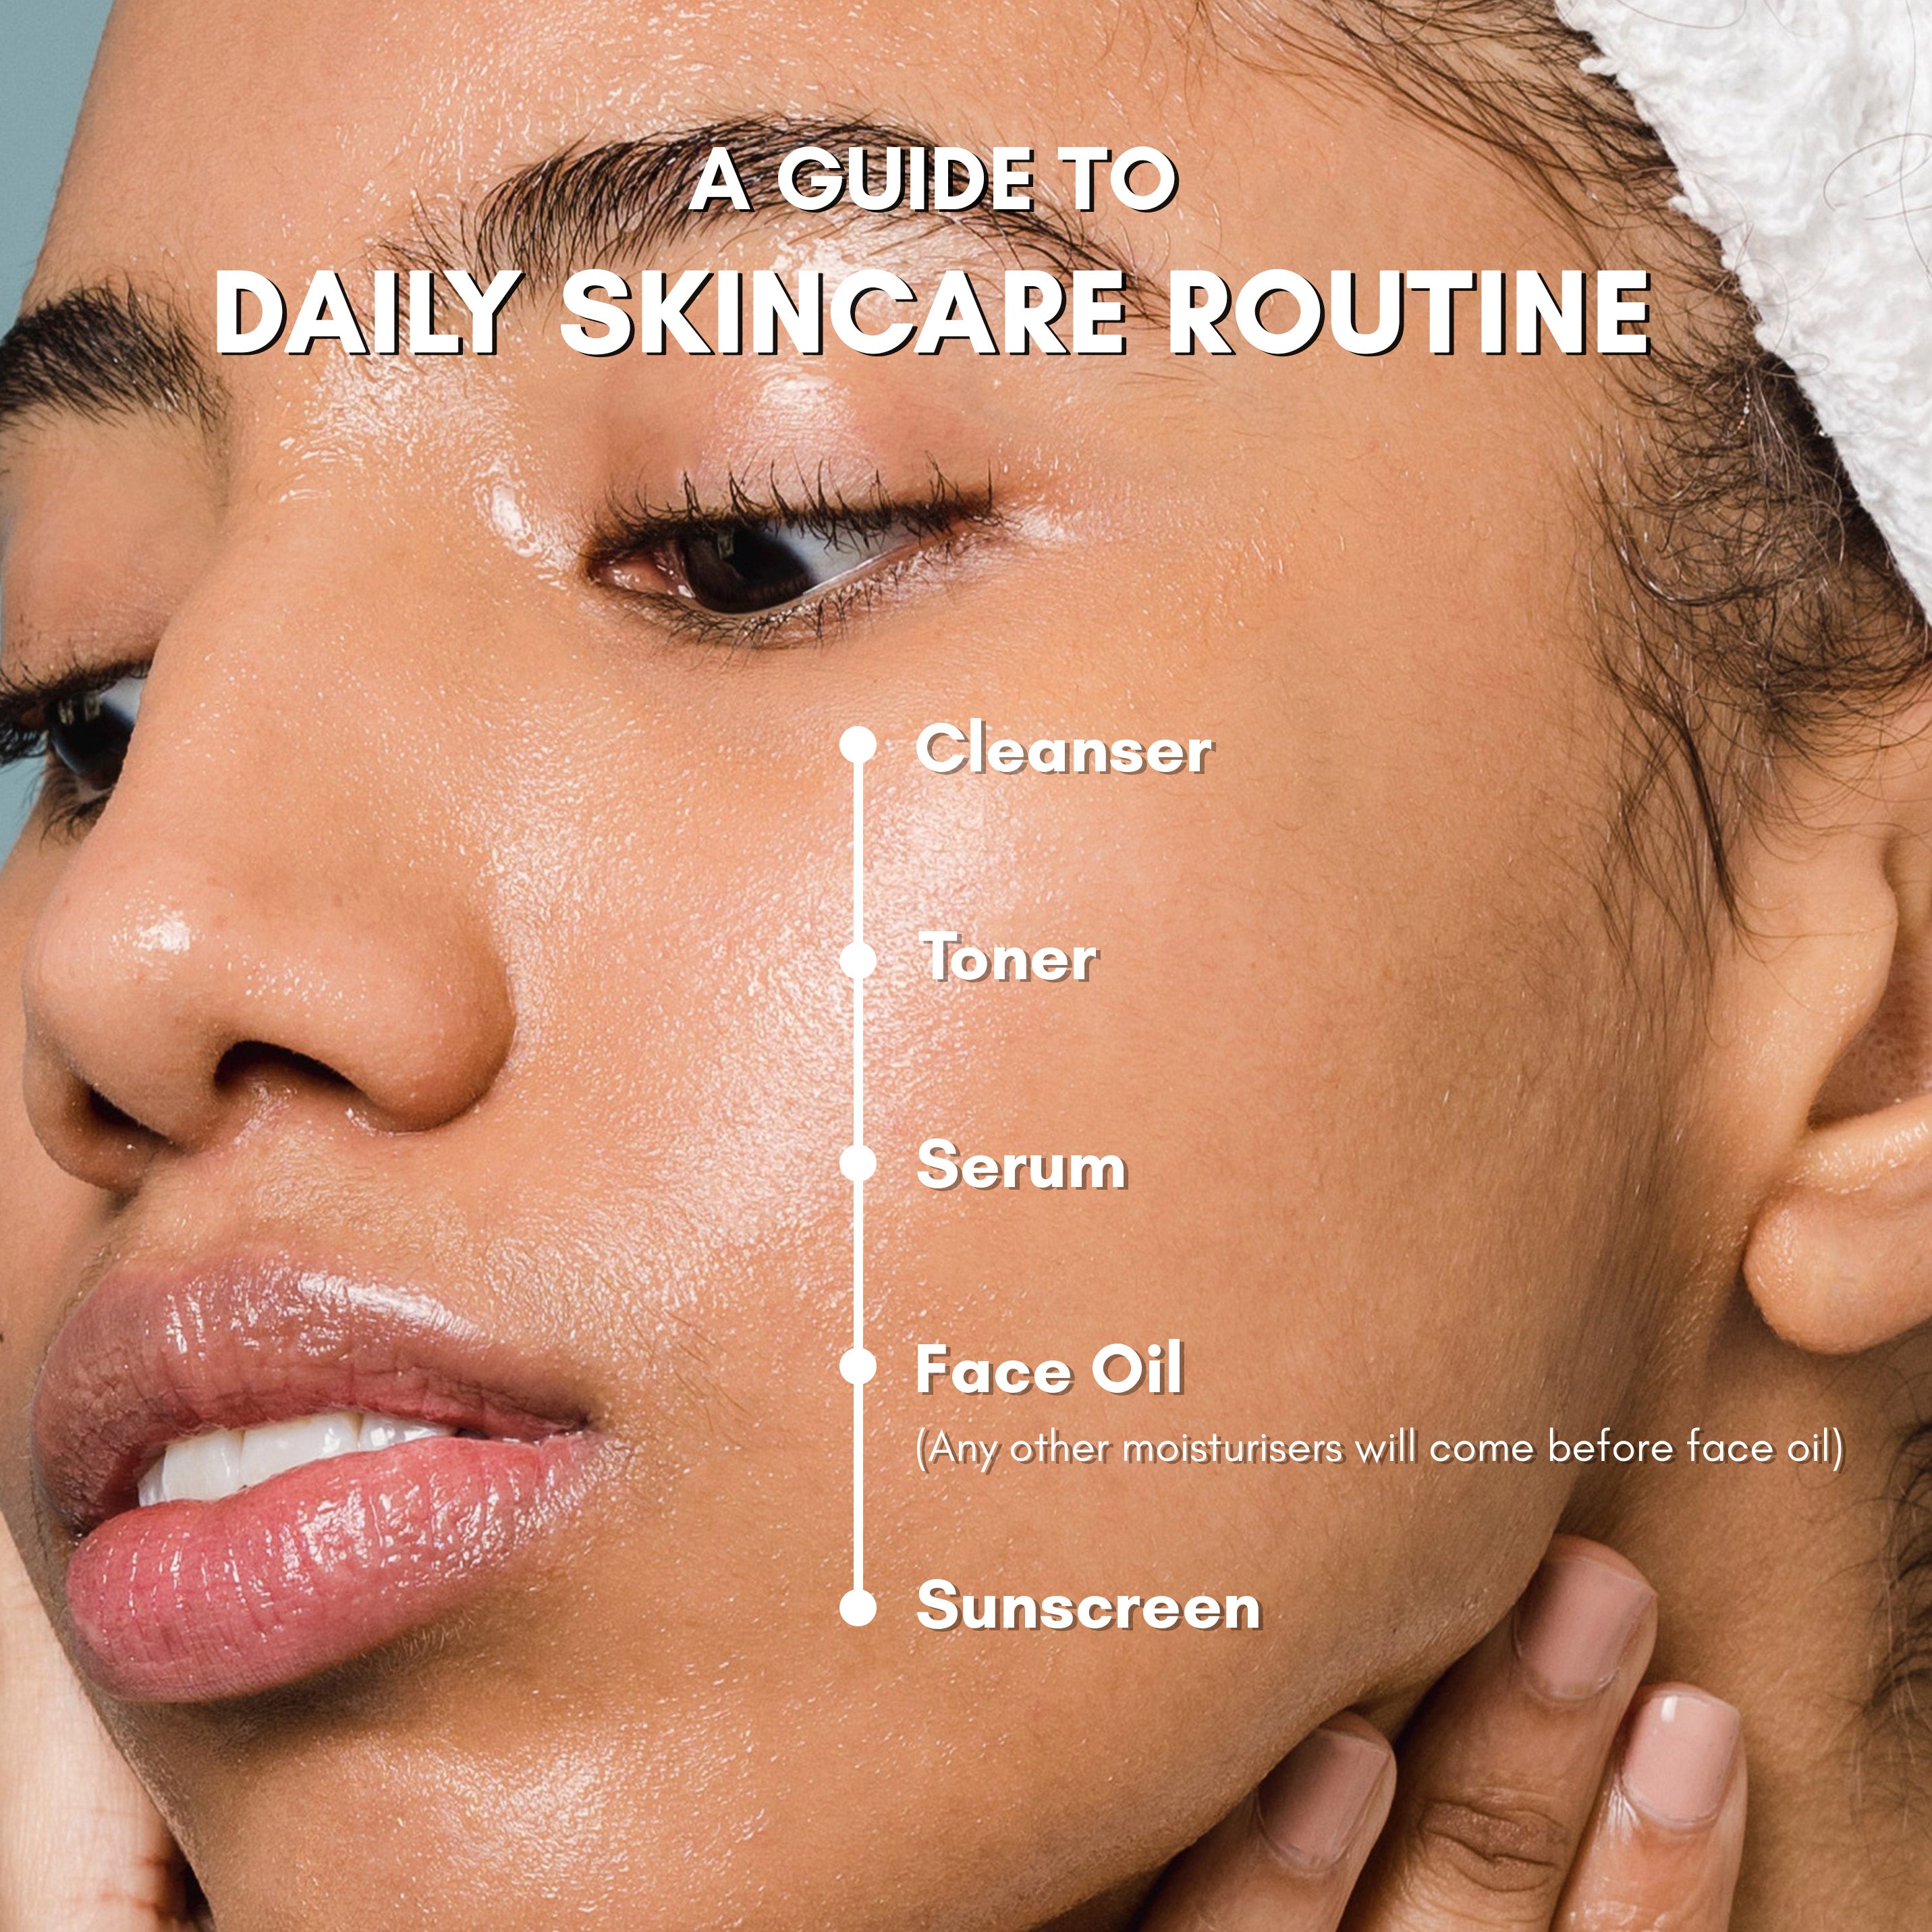 A guide to daily skincare routine